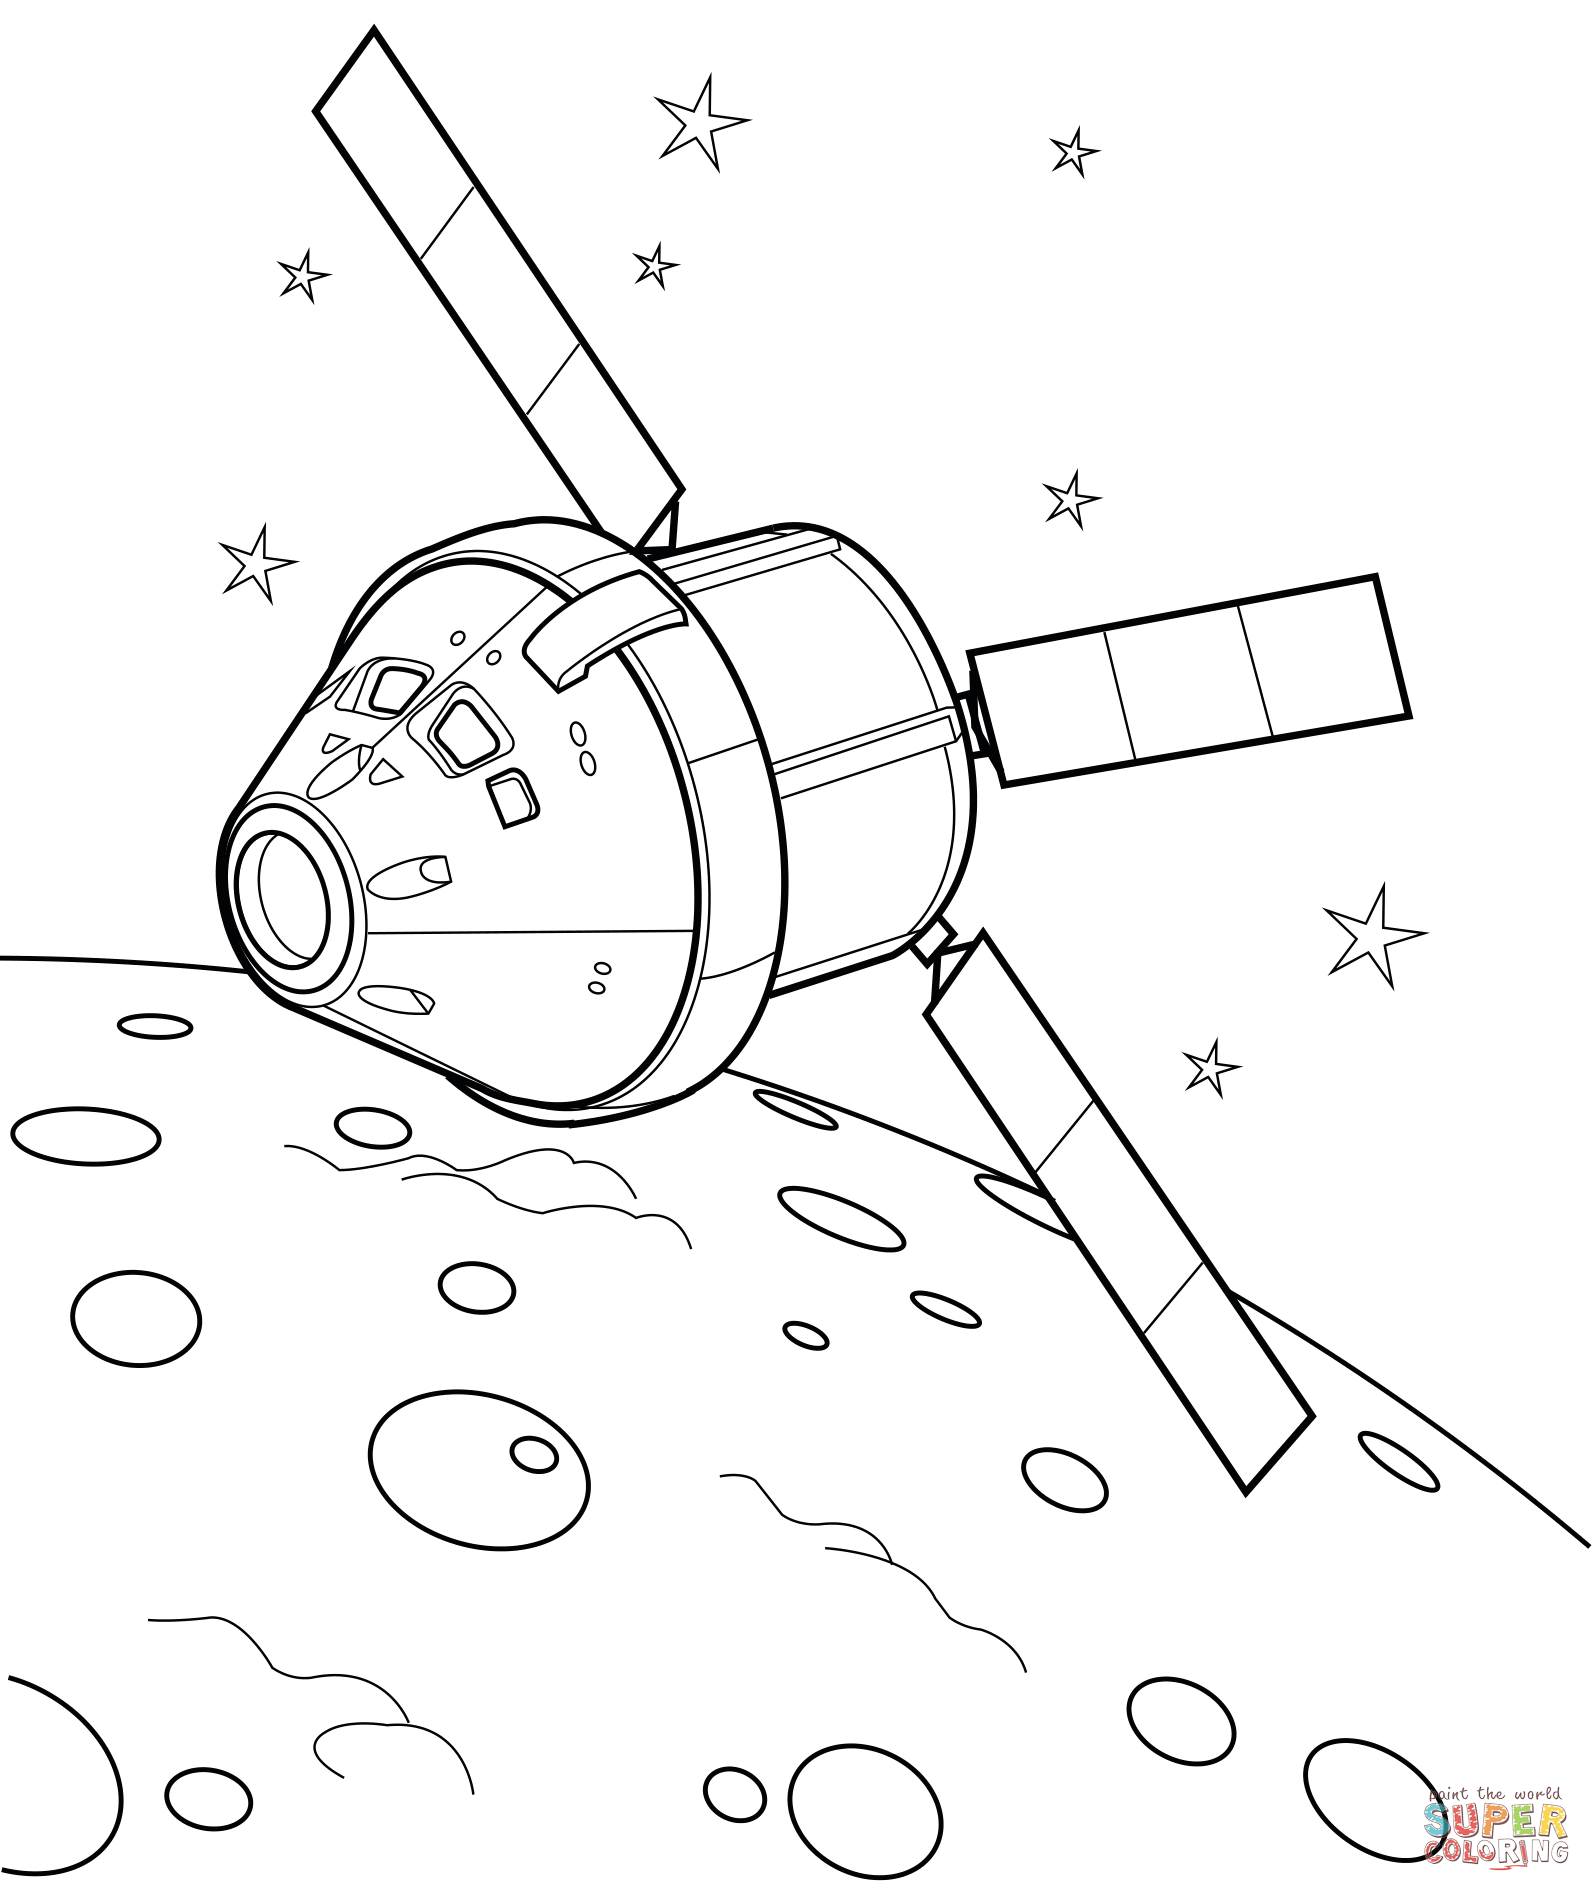 Orion spacecraft coloring page free printable coloring pages